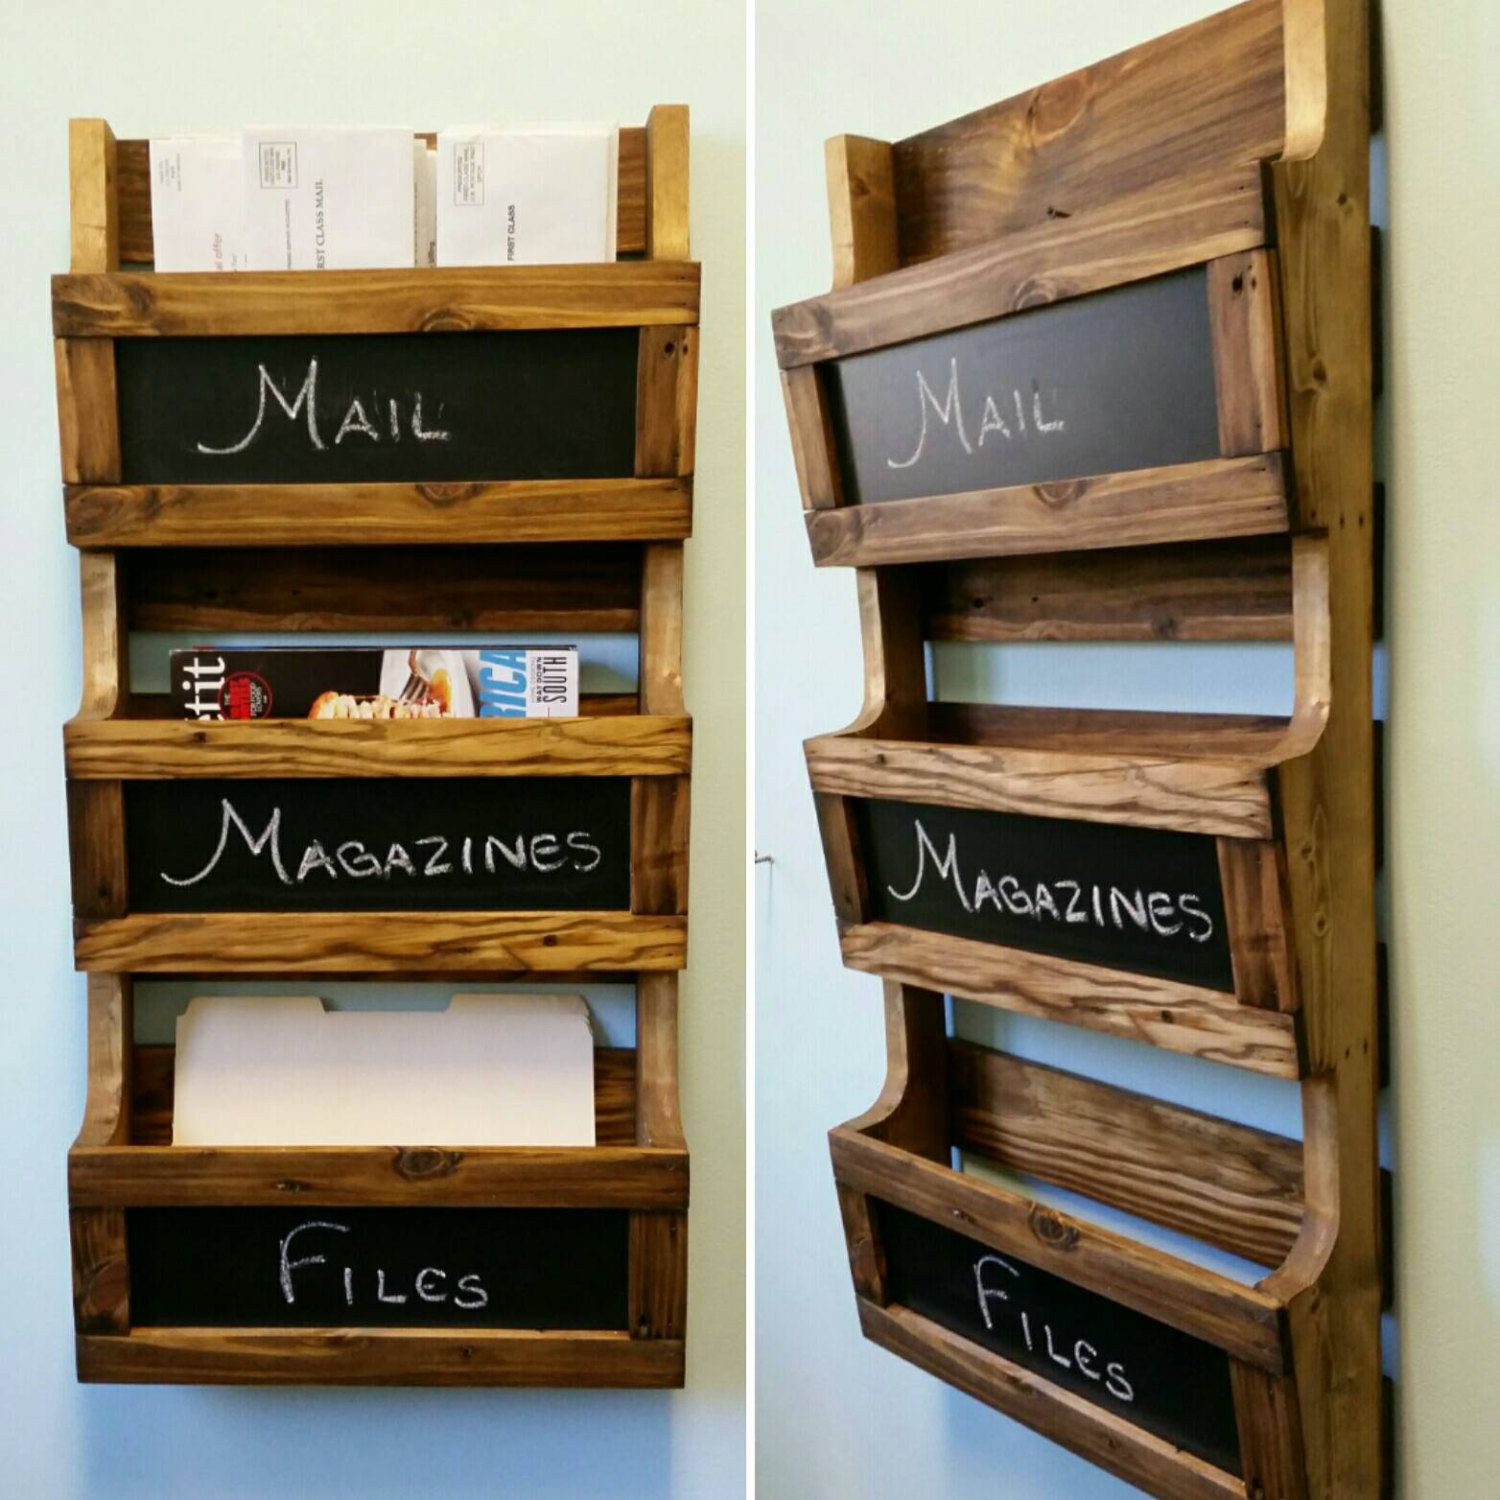 DIY Wall Organizer Ideas
 Accessories Ikea Book Boxes And Wall File Organizer Also